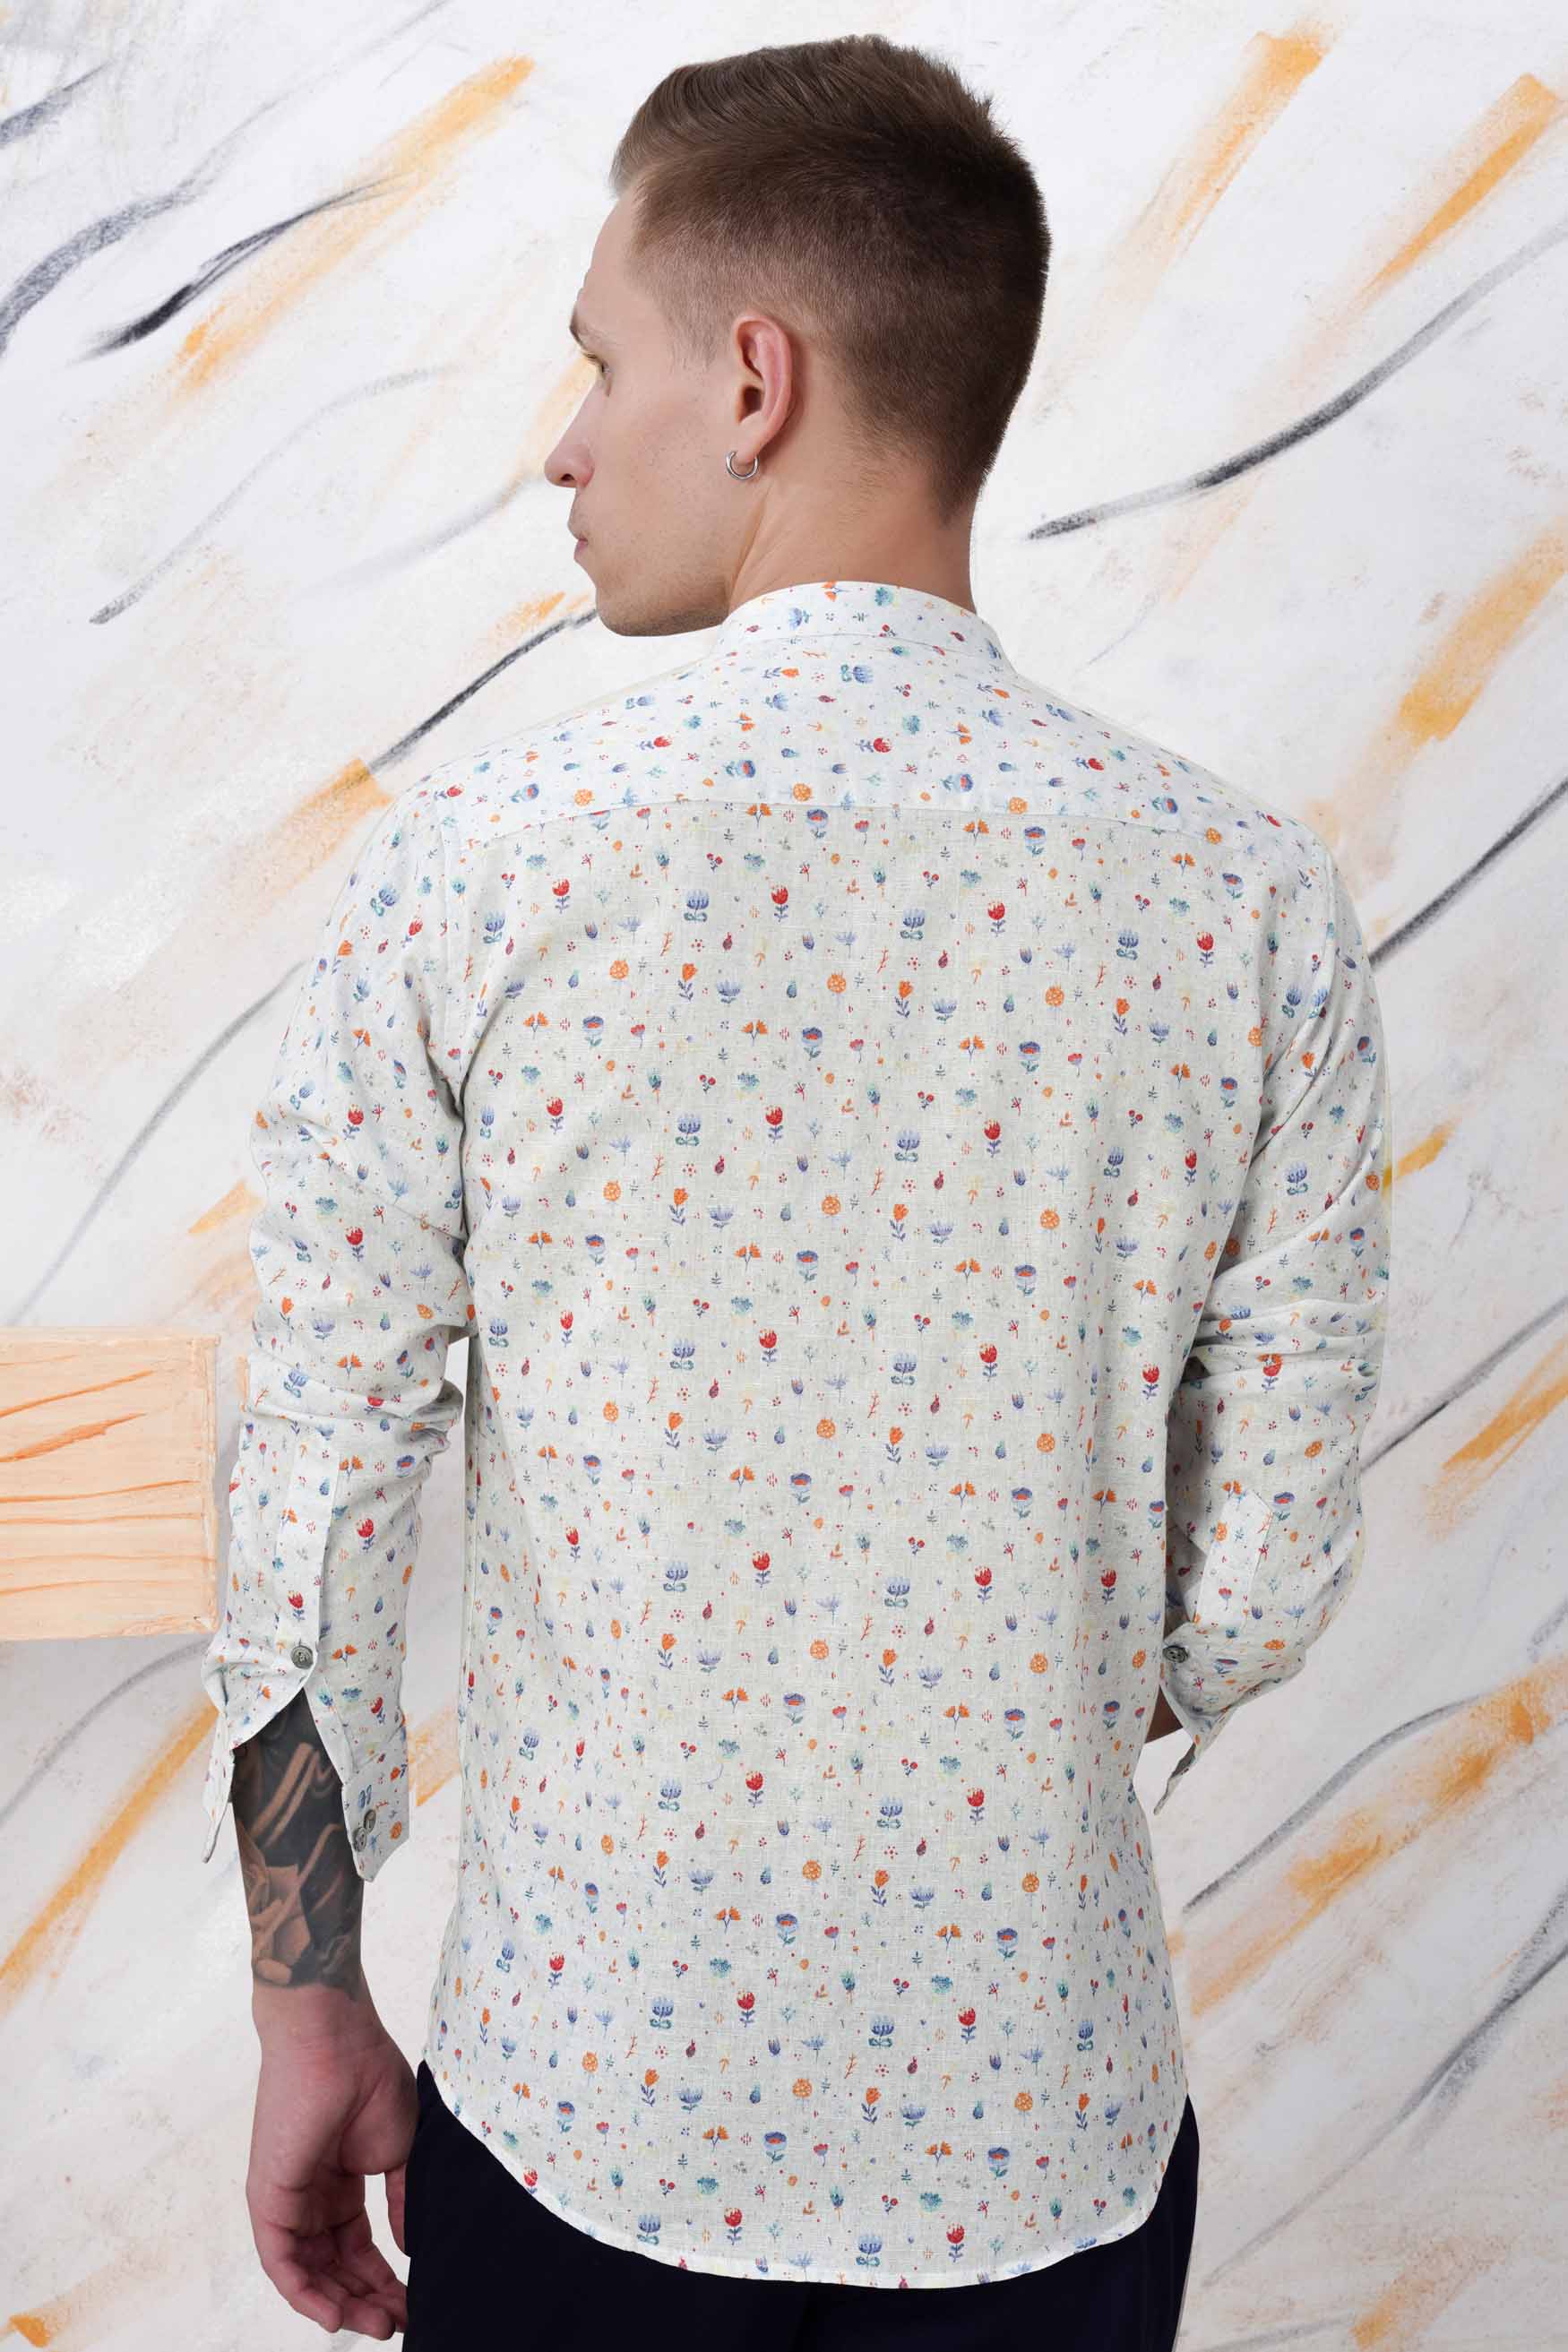 Bright White with Spindle Blue Multicolour Floral Printed Luxurious Linen Shirt 11570-M-GRY-38, 11570-M-GRY-H-38, 11570-M-GRY-39, 11570-M-GRY-H-39, 11570-M-GRY-40, 11570-M-GRY-H-40, 11570-M-GRY-42, 11570-M-GRY-H-42, 11570-M-GRY-44, 11570-M-GRY-H-44, 11570-M-GRY-46, 11570-M-GRY-H-46, 11570-M-GRY-48, 11570-M-GRY-H-48, 11570-M-GRY-50, 11570-M-GRY-H-50, 11570-M-GRY-52, 11570-M-GRY-H-52